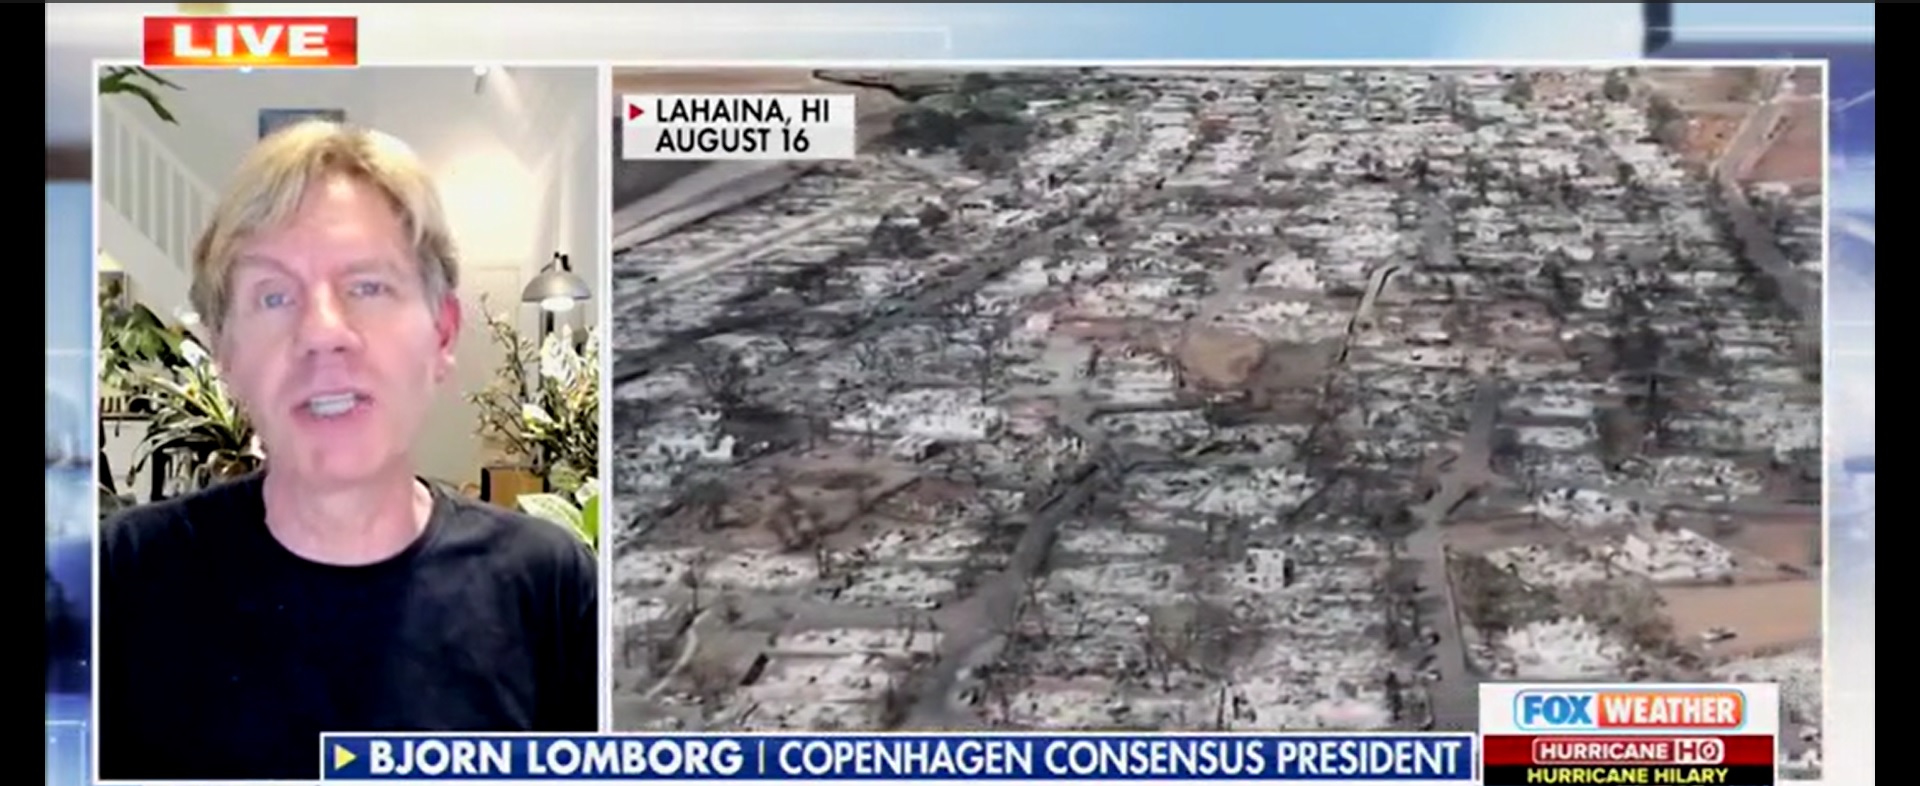 ‘We Are Not Learning’: Bjorn Lomborg Says Politicians Hide Behind Climate Change To Duck ‘Responsibility’ For ‘Failures’